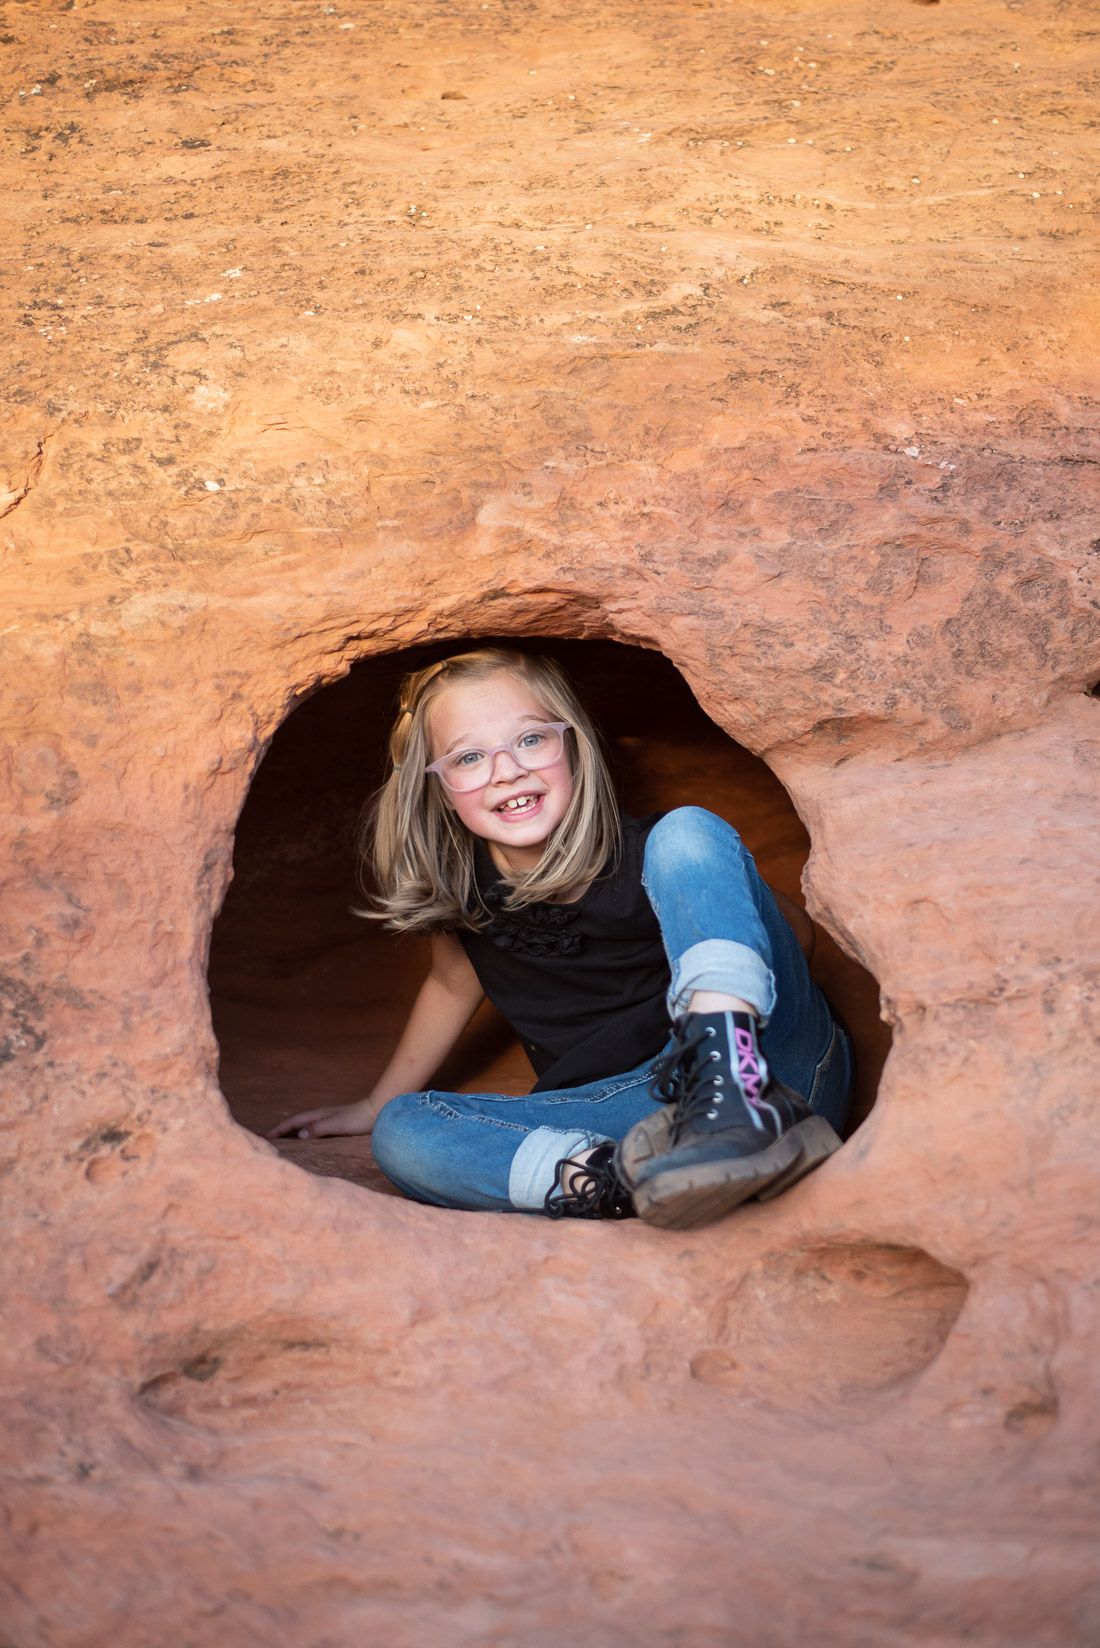 Young girl playing inside a hole in the red rocks